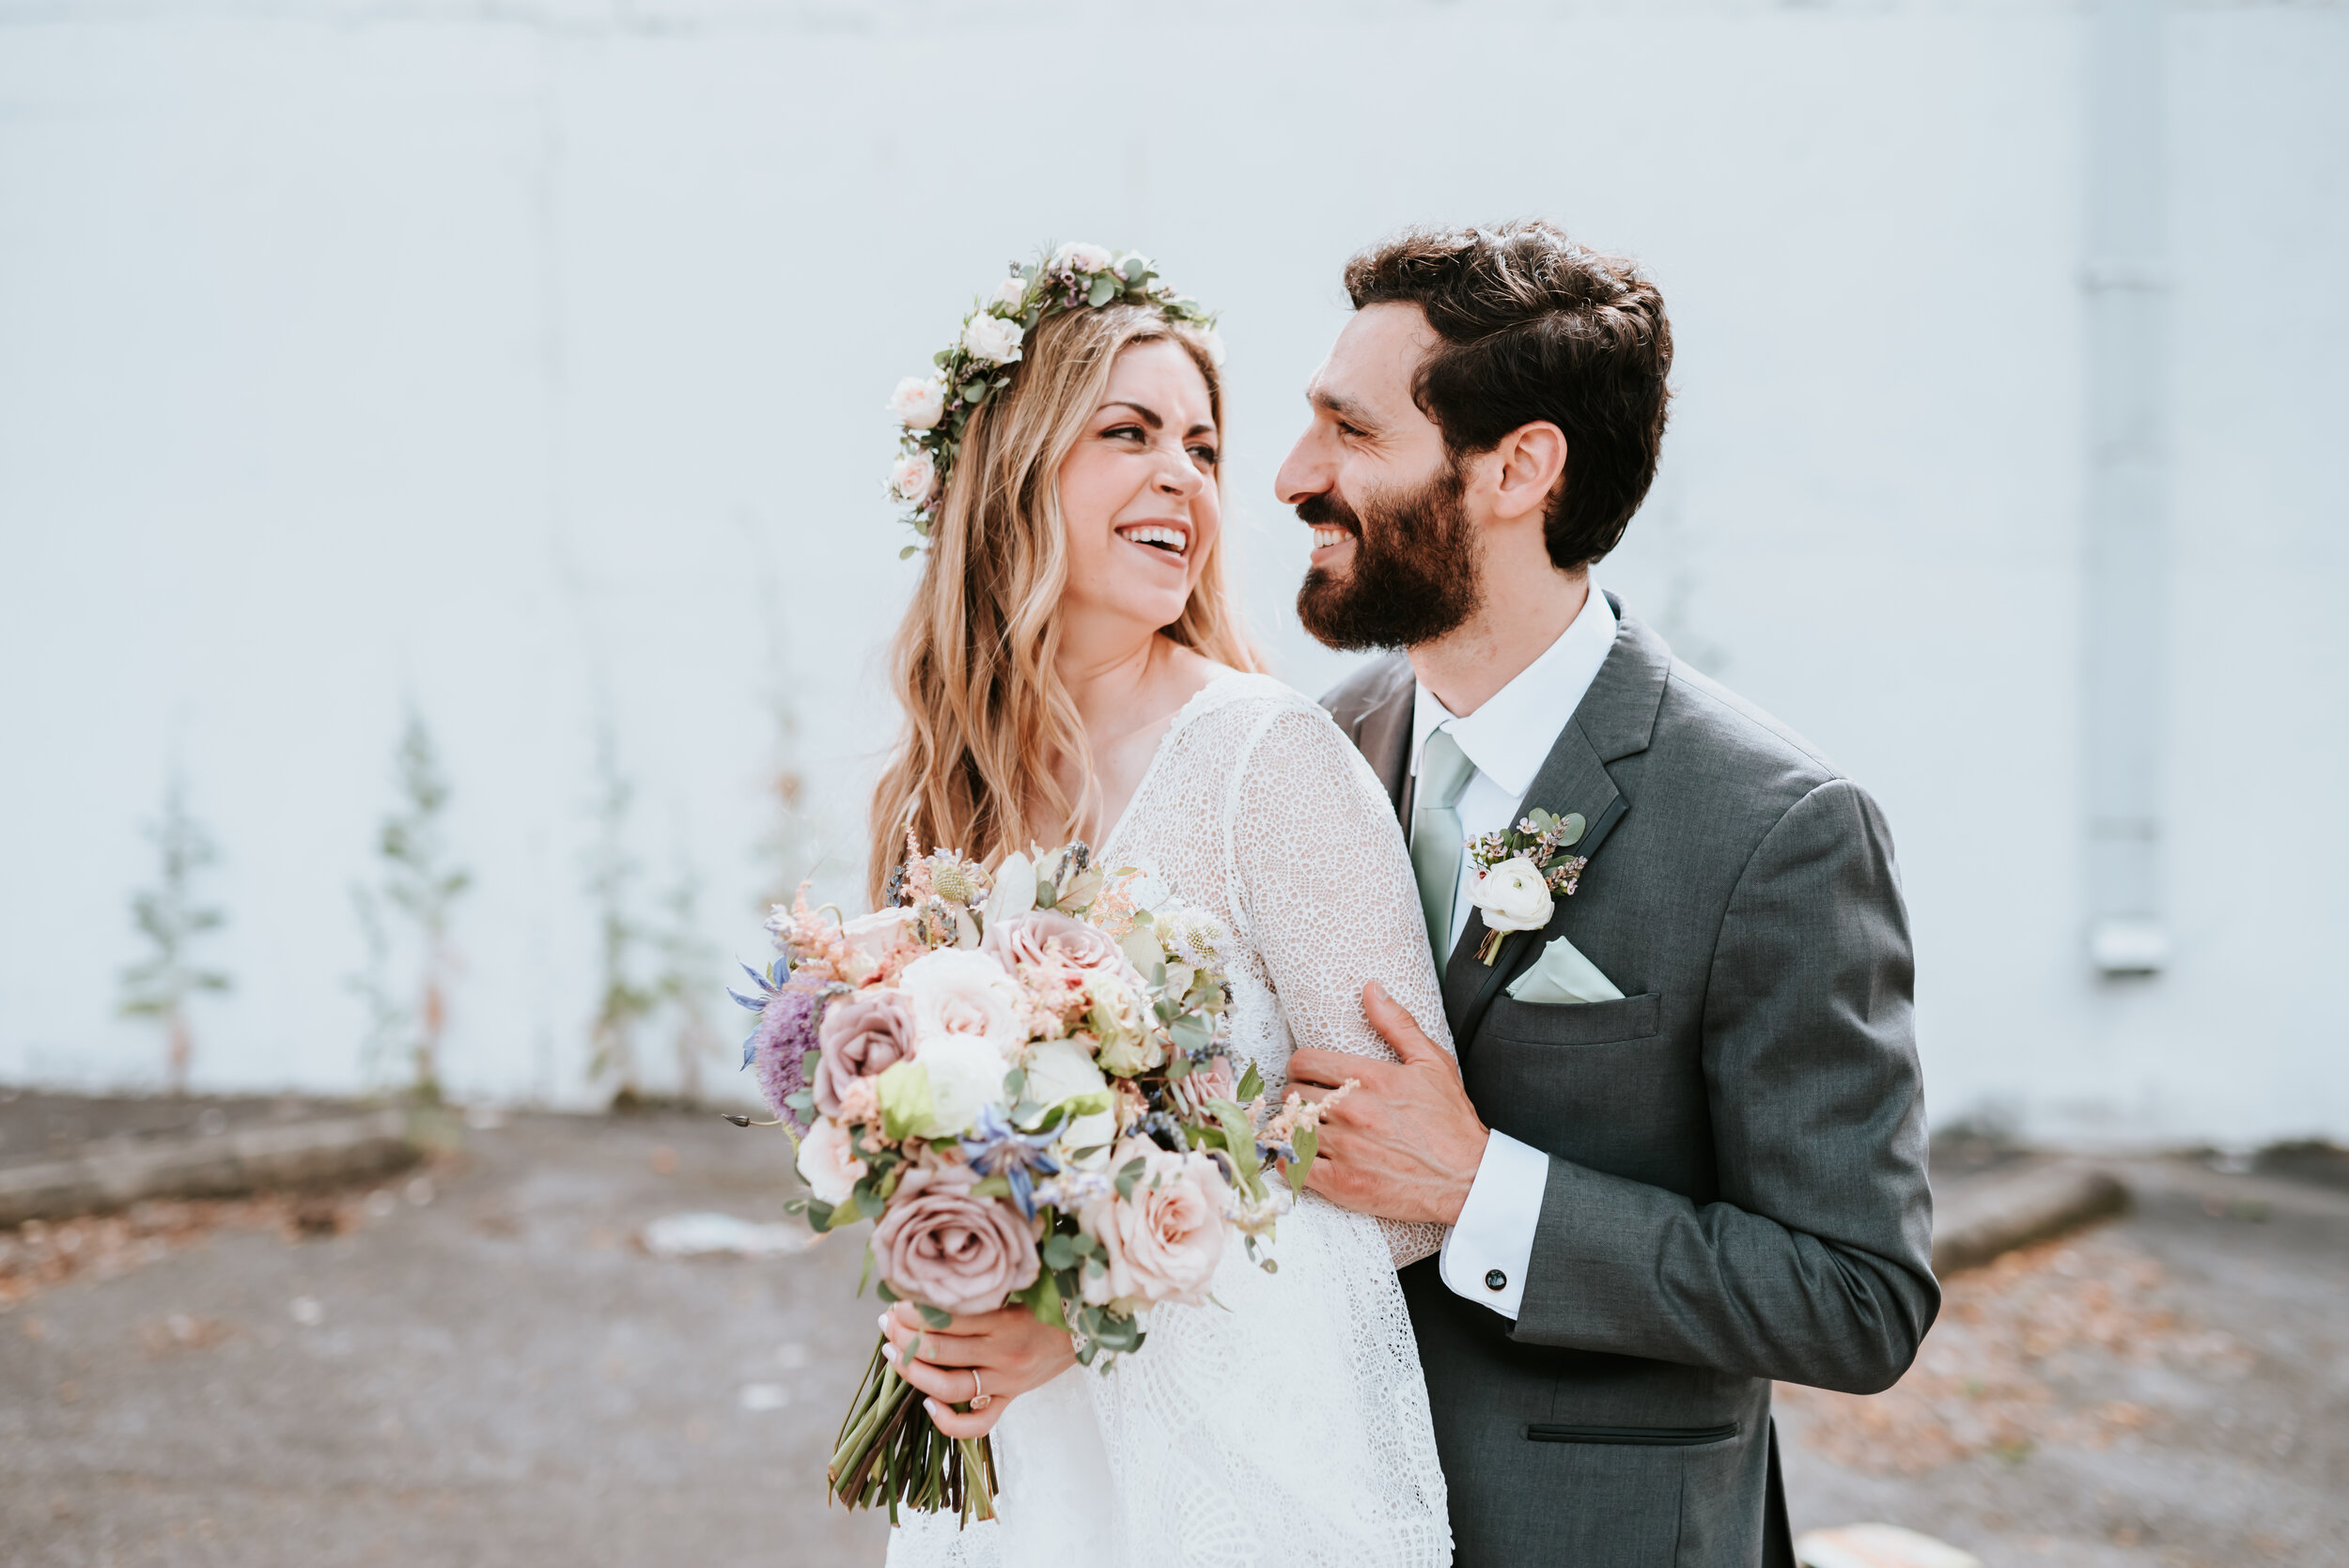 Lavender, mauve, and lilac bridal bouquet with garden roses, ranunculus, astilbe, scabies, clematis, eucalyptus, and greenery. Nashville wedding floral designer at the Saint Elle.